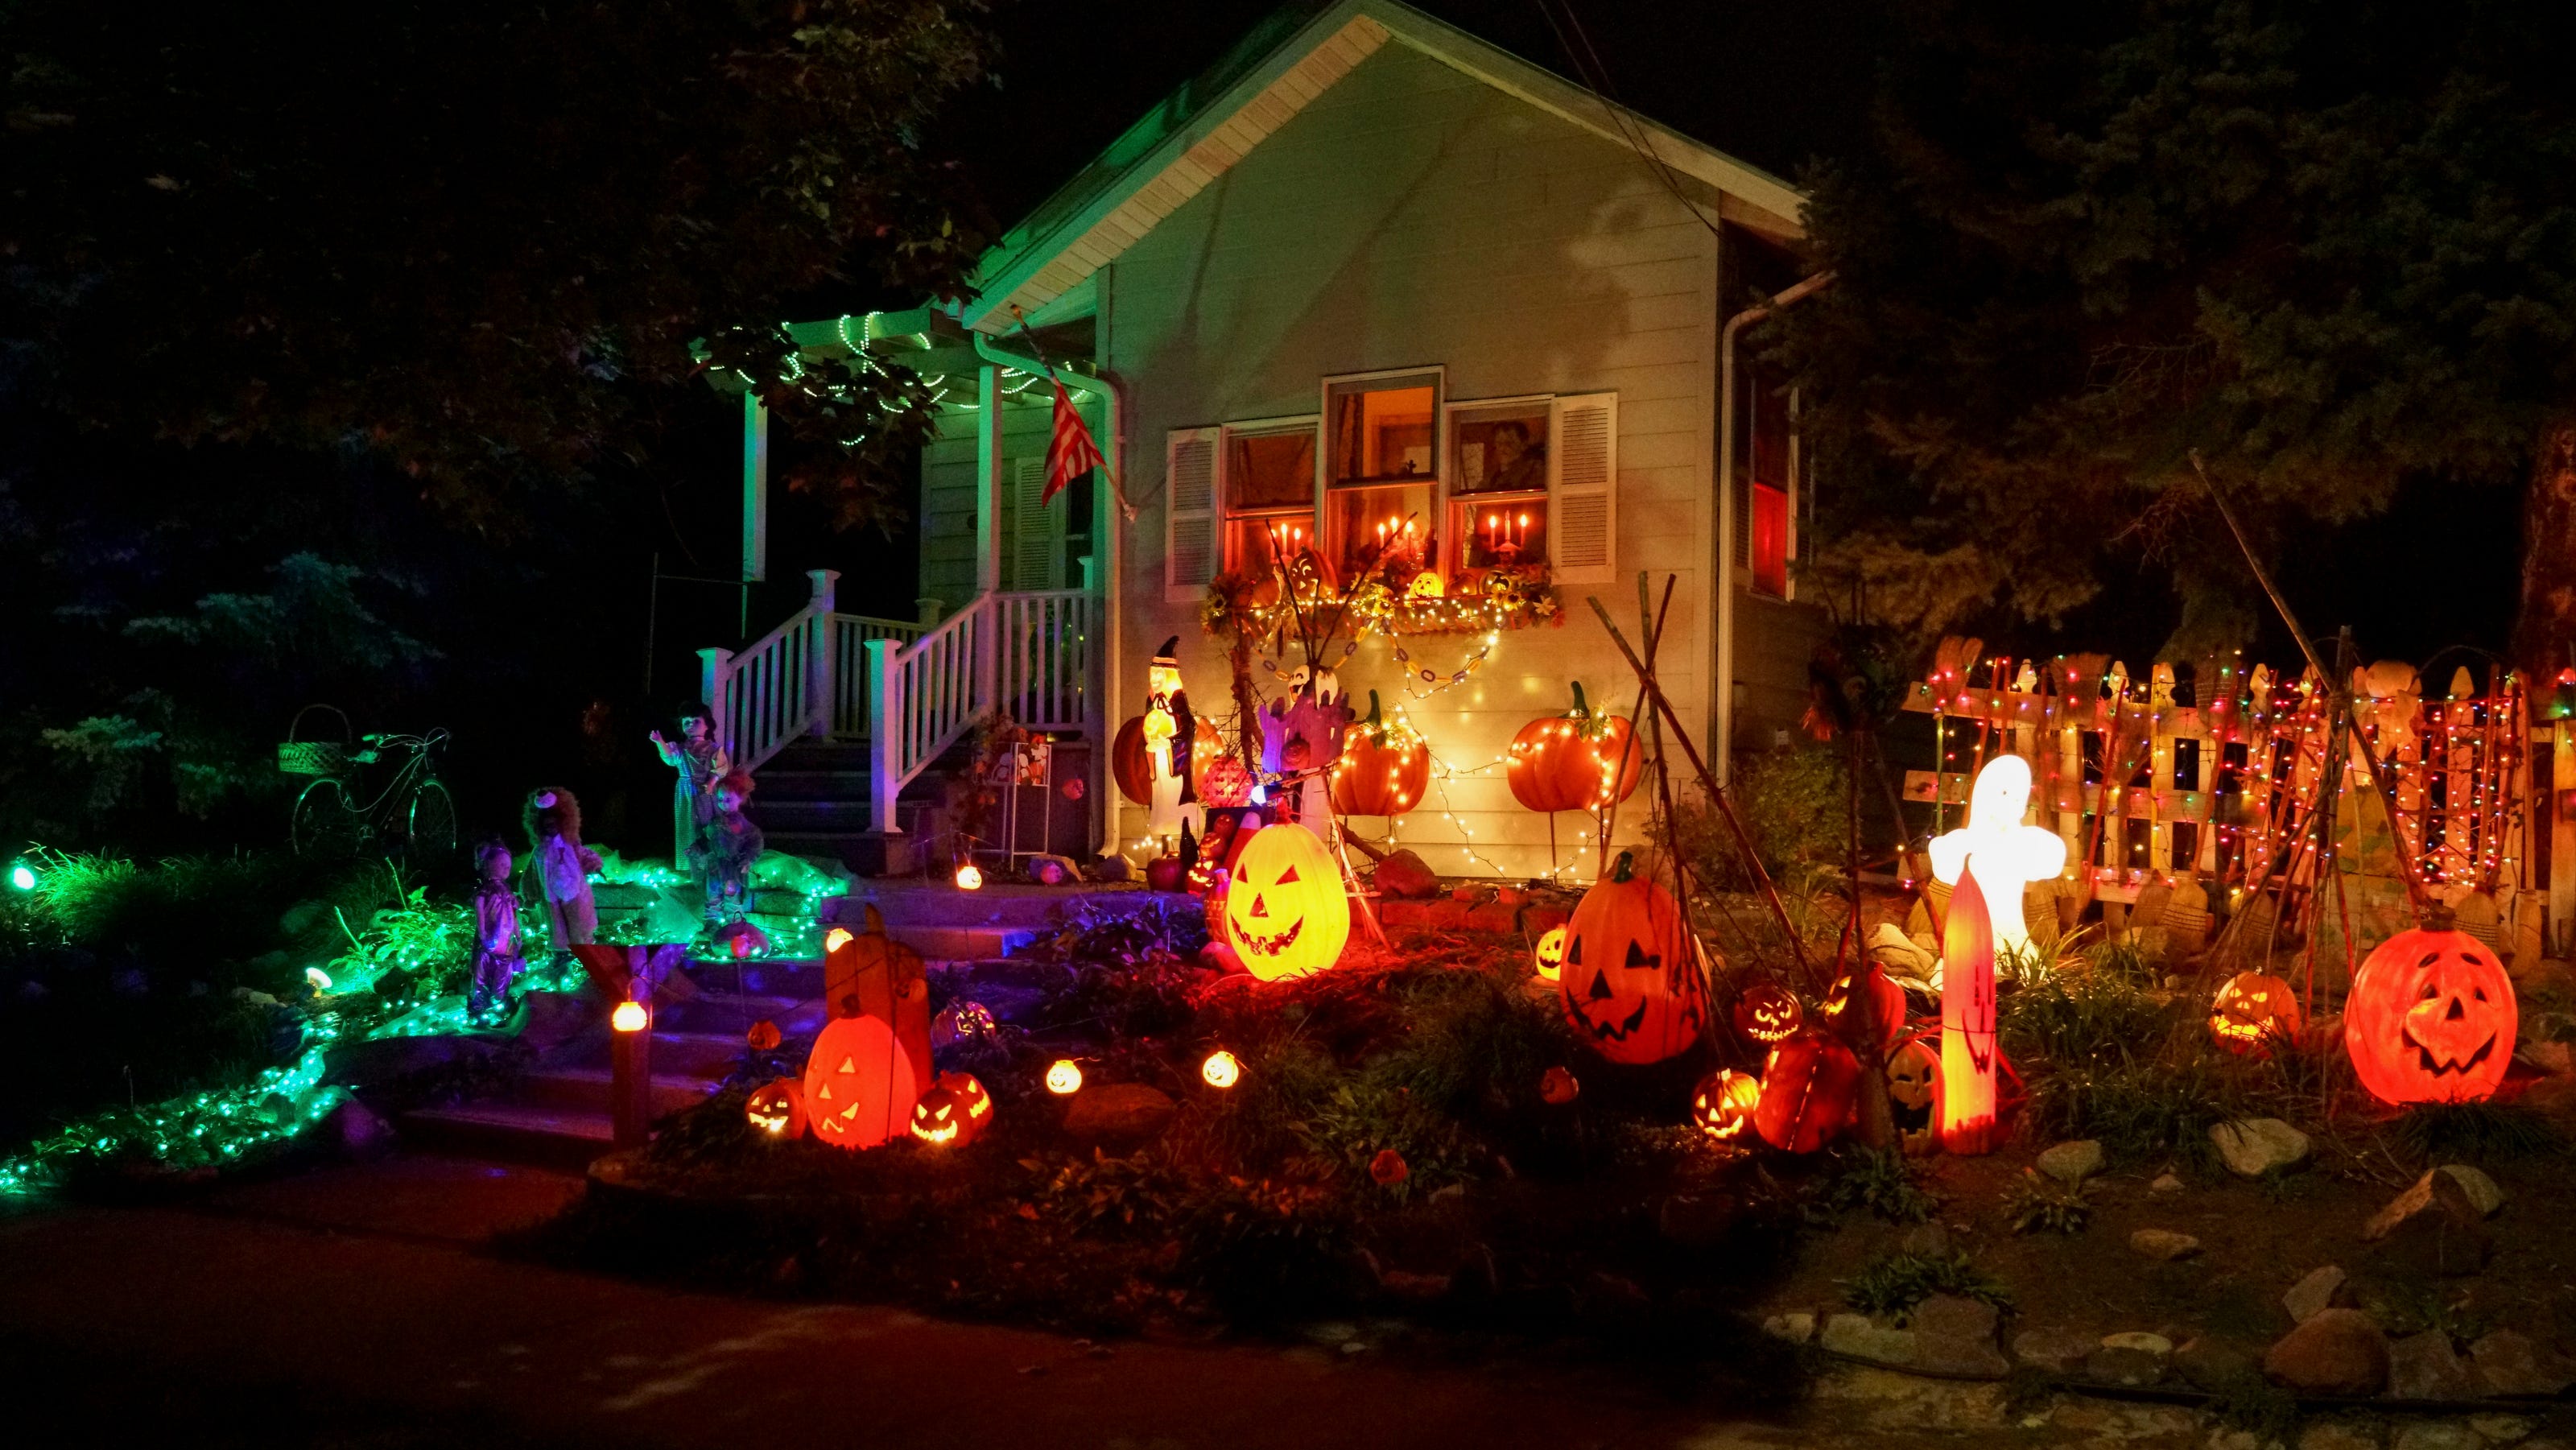 Find these Halloween-decorated houses around Sioux Falls